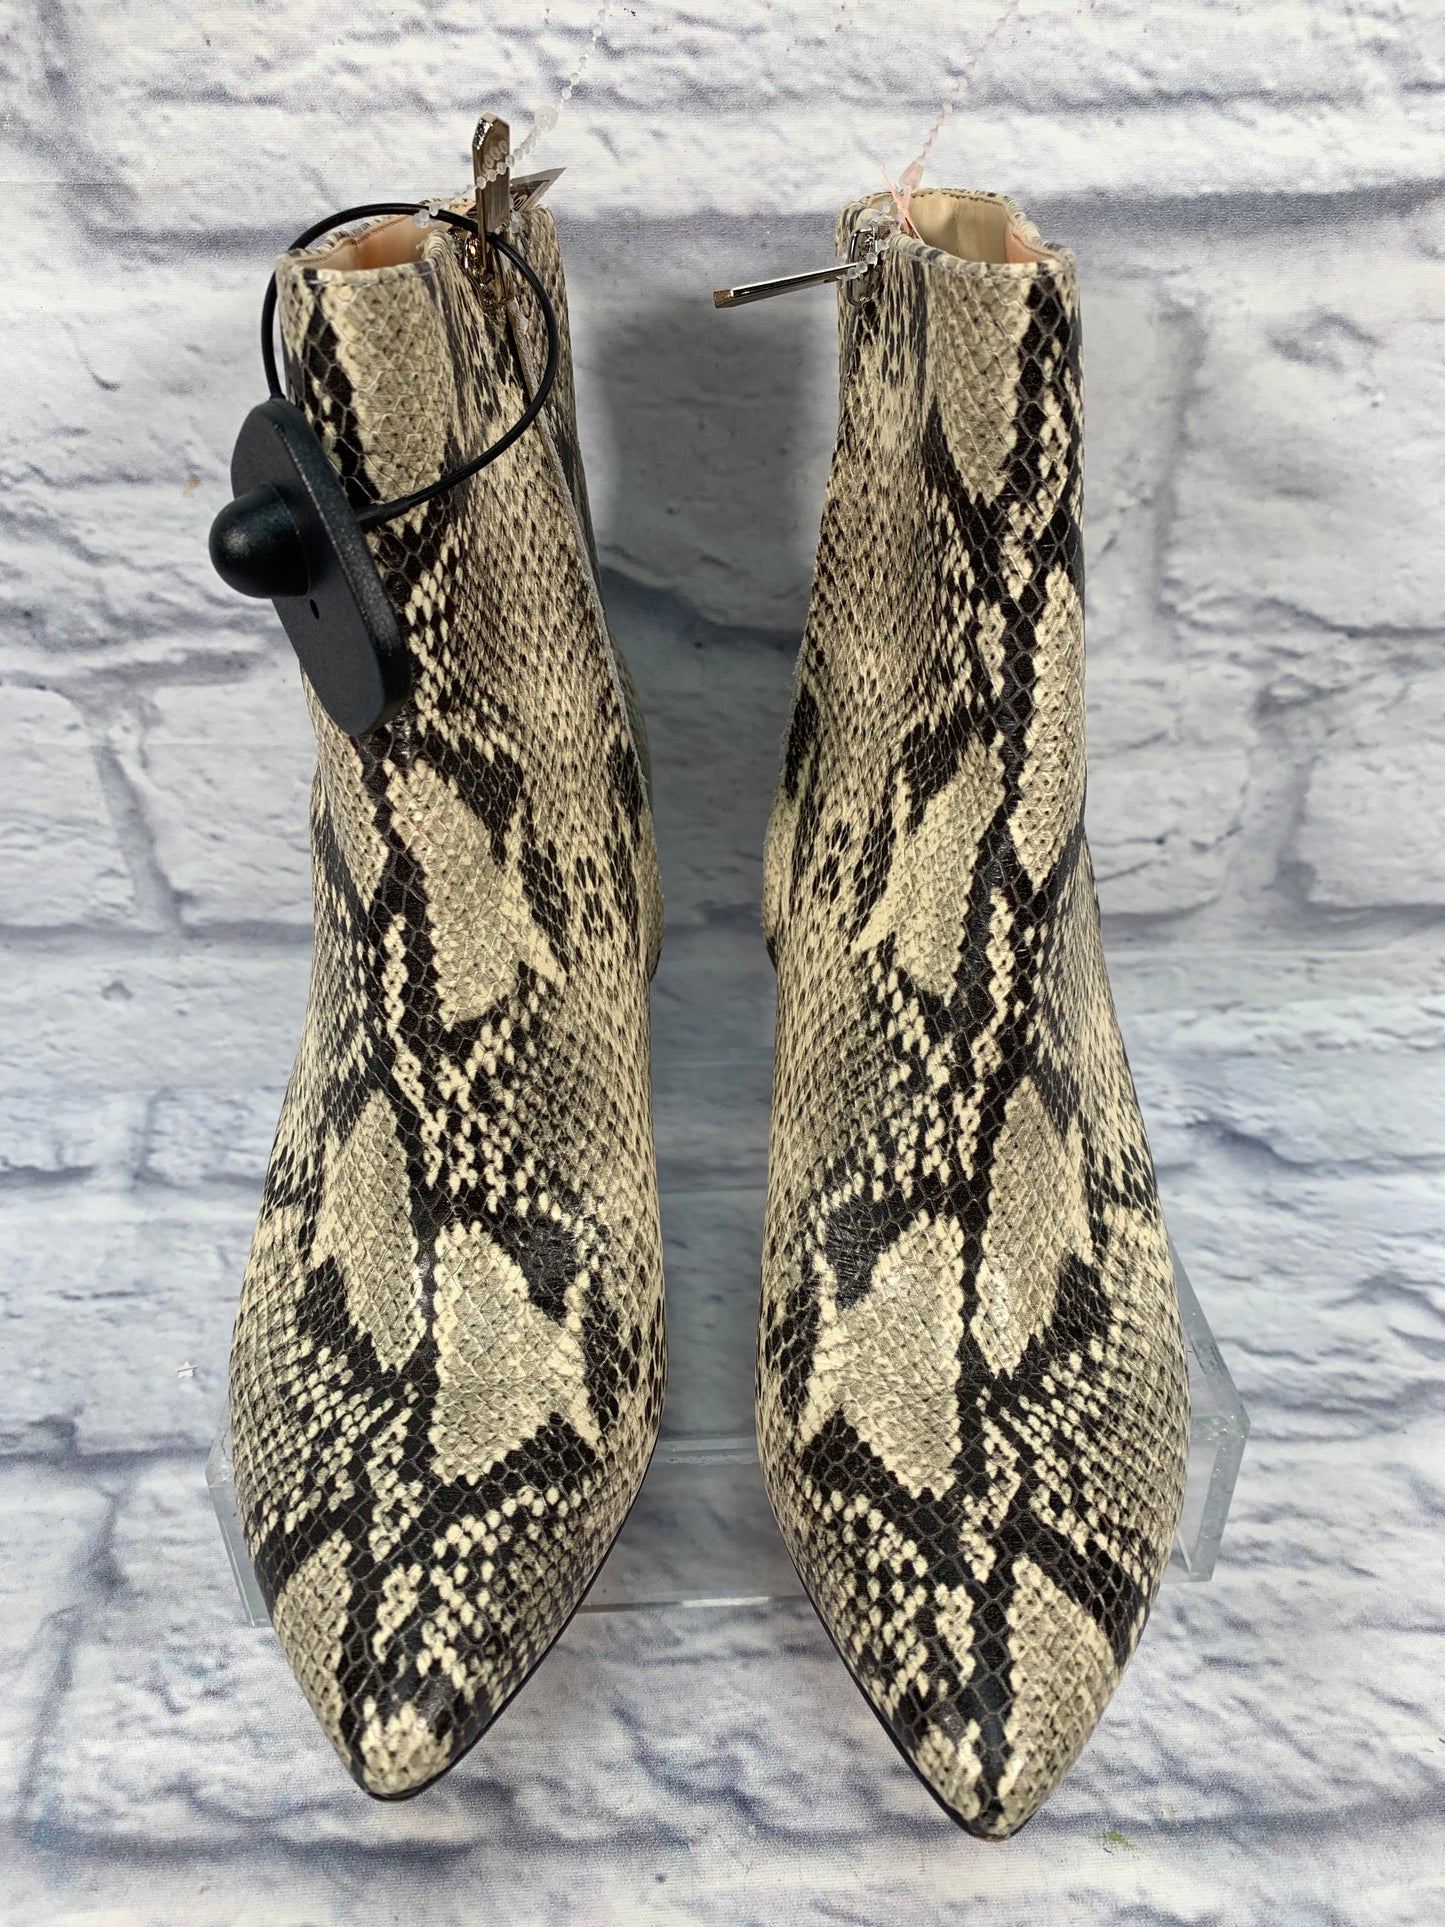 Boots Ankle Heels By Sam Edelman  Size: 8.5